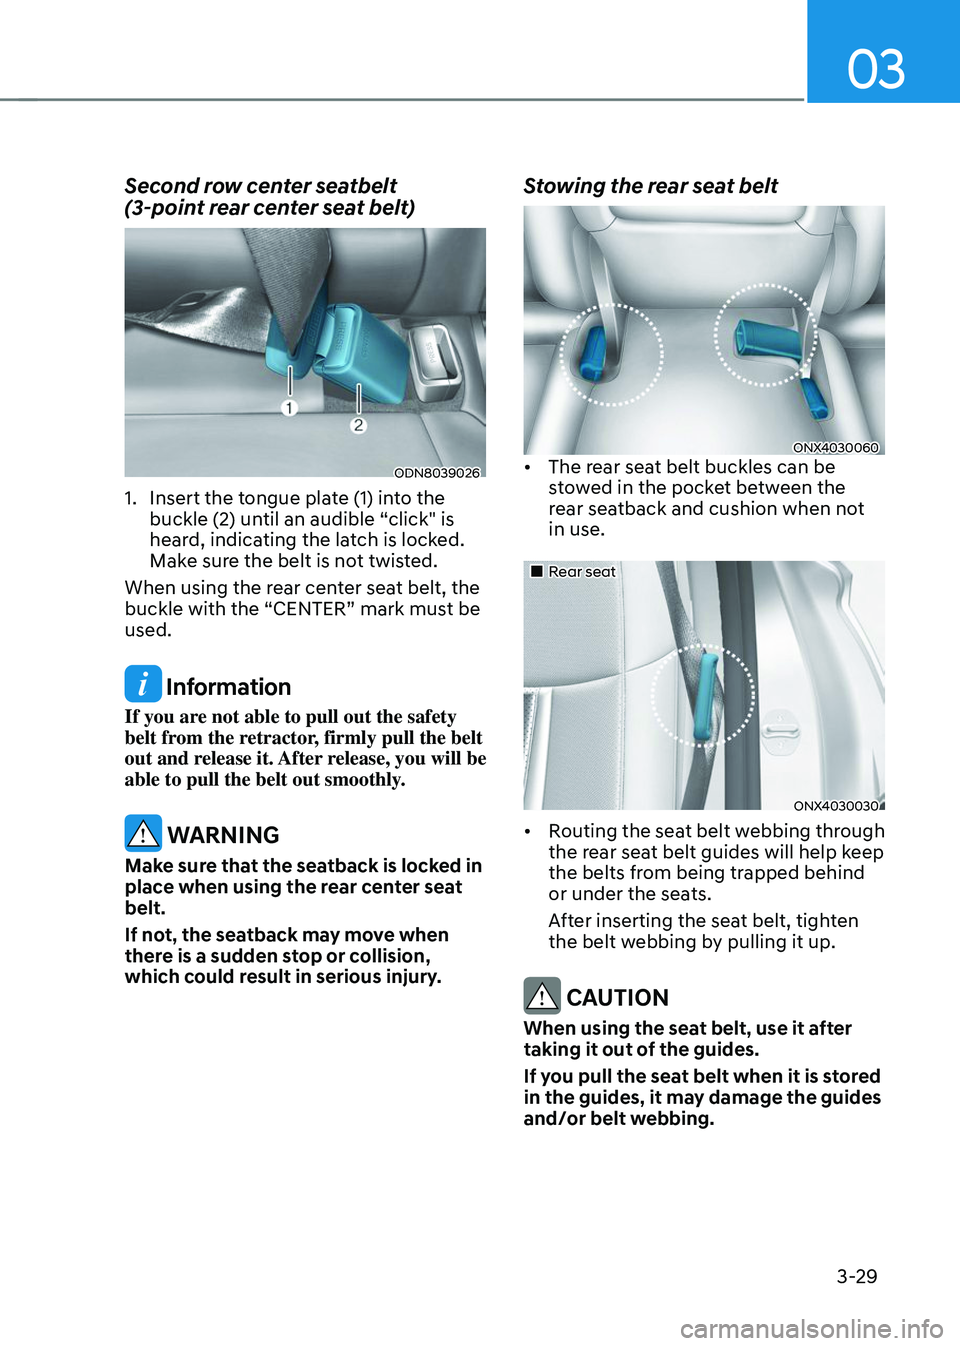 HYUNDAI TUCSON 2023  Owners Manual 03
3-29
Second row center seatbelt  
(3-point rear center seat belt)
ODN8039026
1. Insert the tongue plate (1) into the 
buckle (2) until an audible “click" is 
heard, indicating the latch is lo